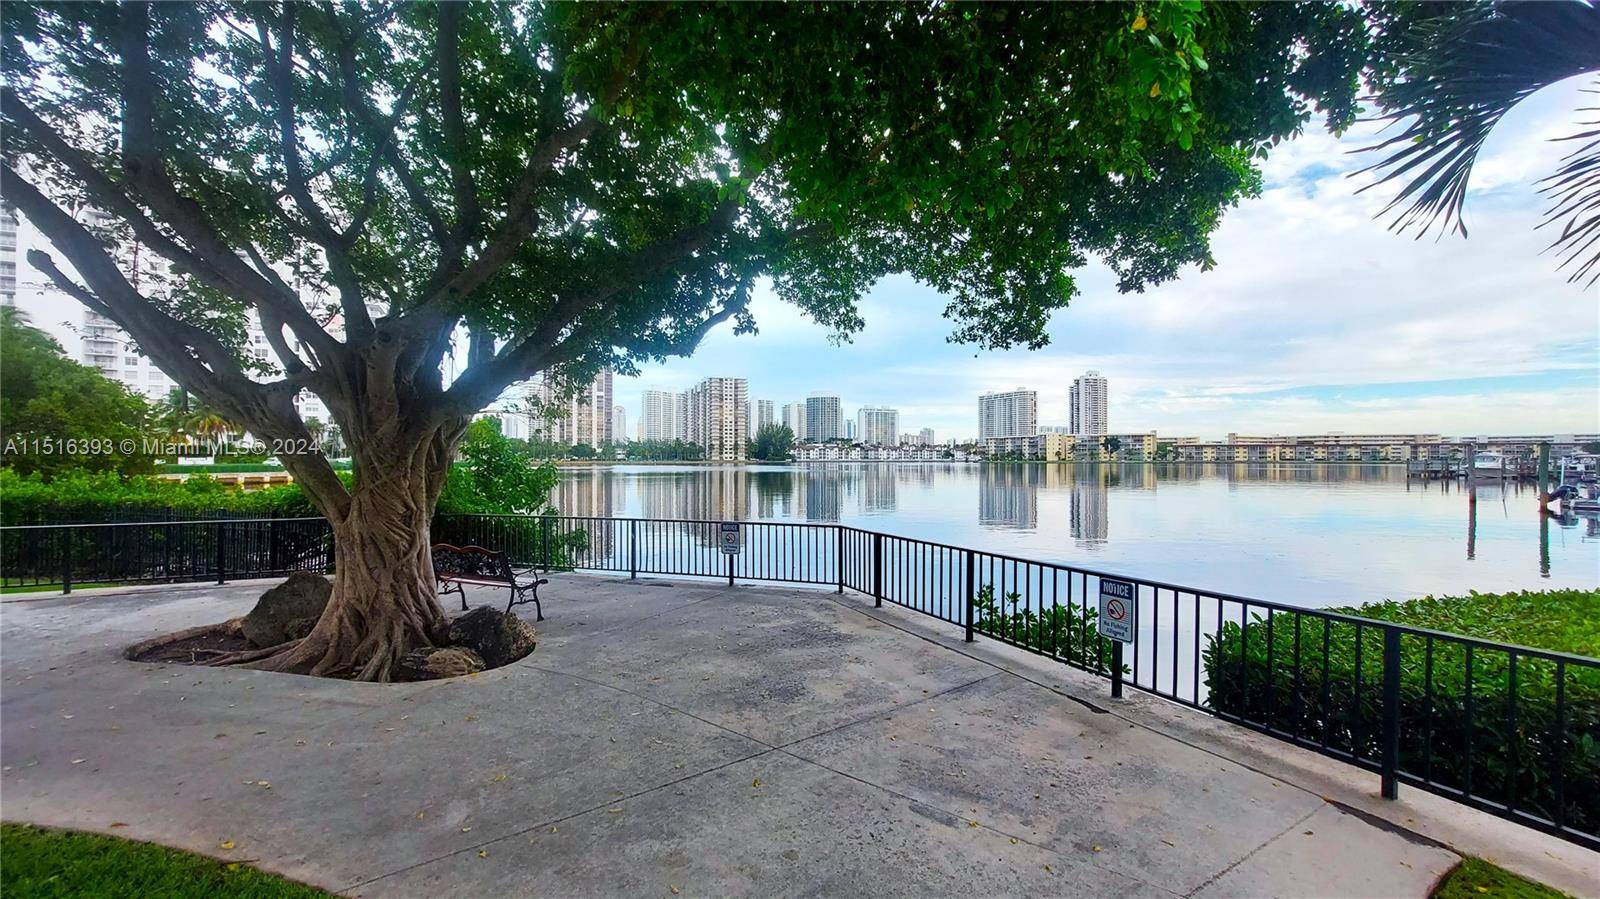 Great 1, 300 SqFt unit with 2 bedrooms and 2 full bathrooms in a building located in Aventura, at the entrance to Williams Island.